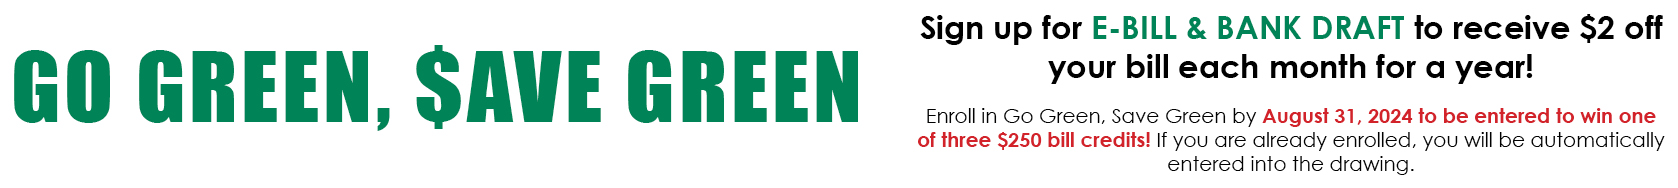 Sign up for Go Green Save Green to receive $2 off your bill each month for a year!